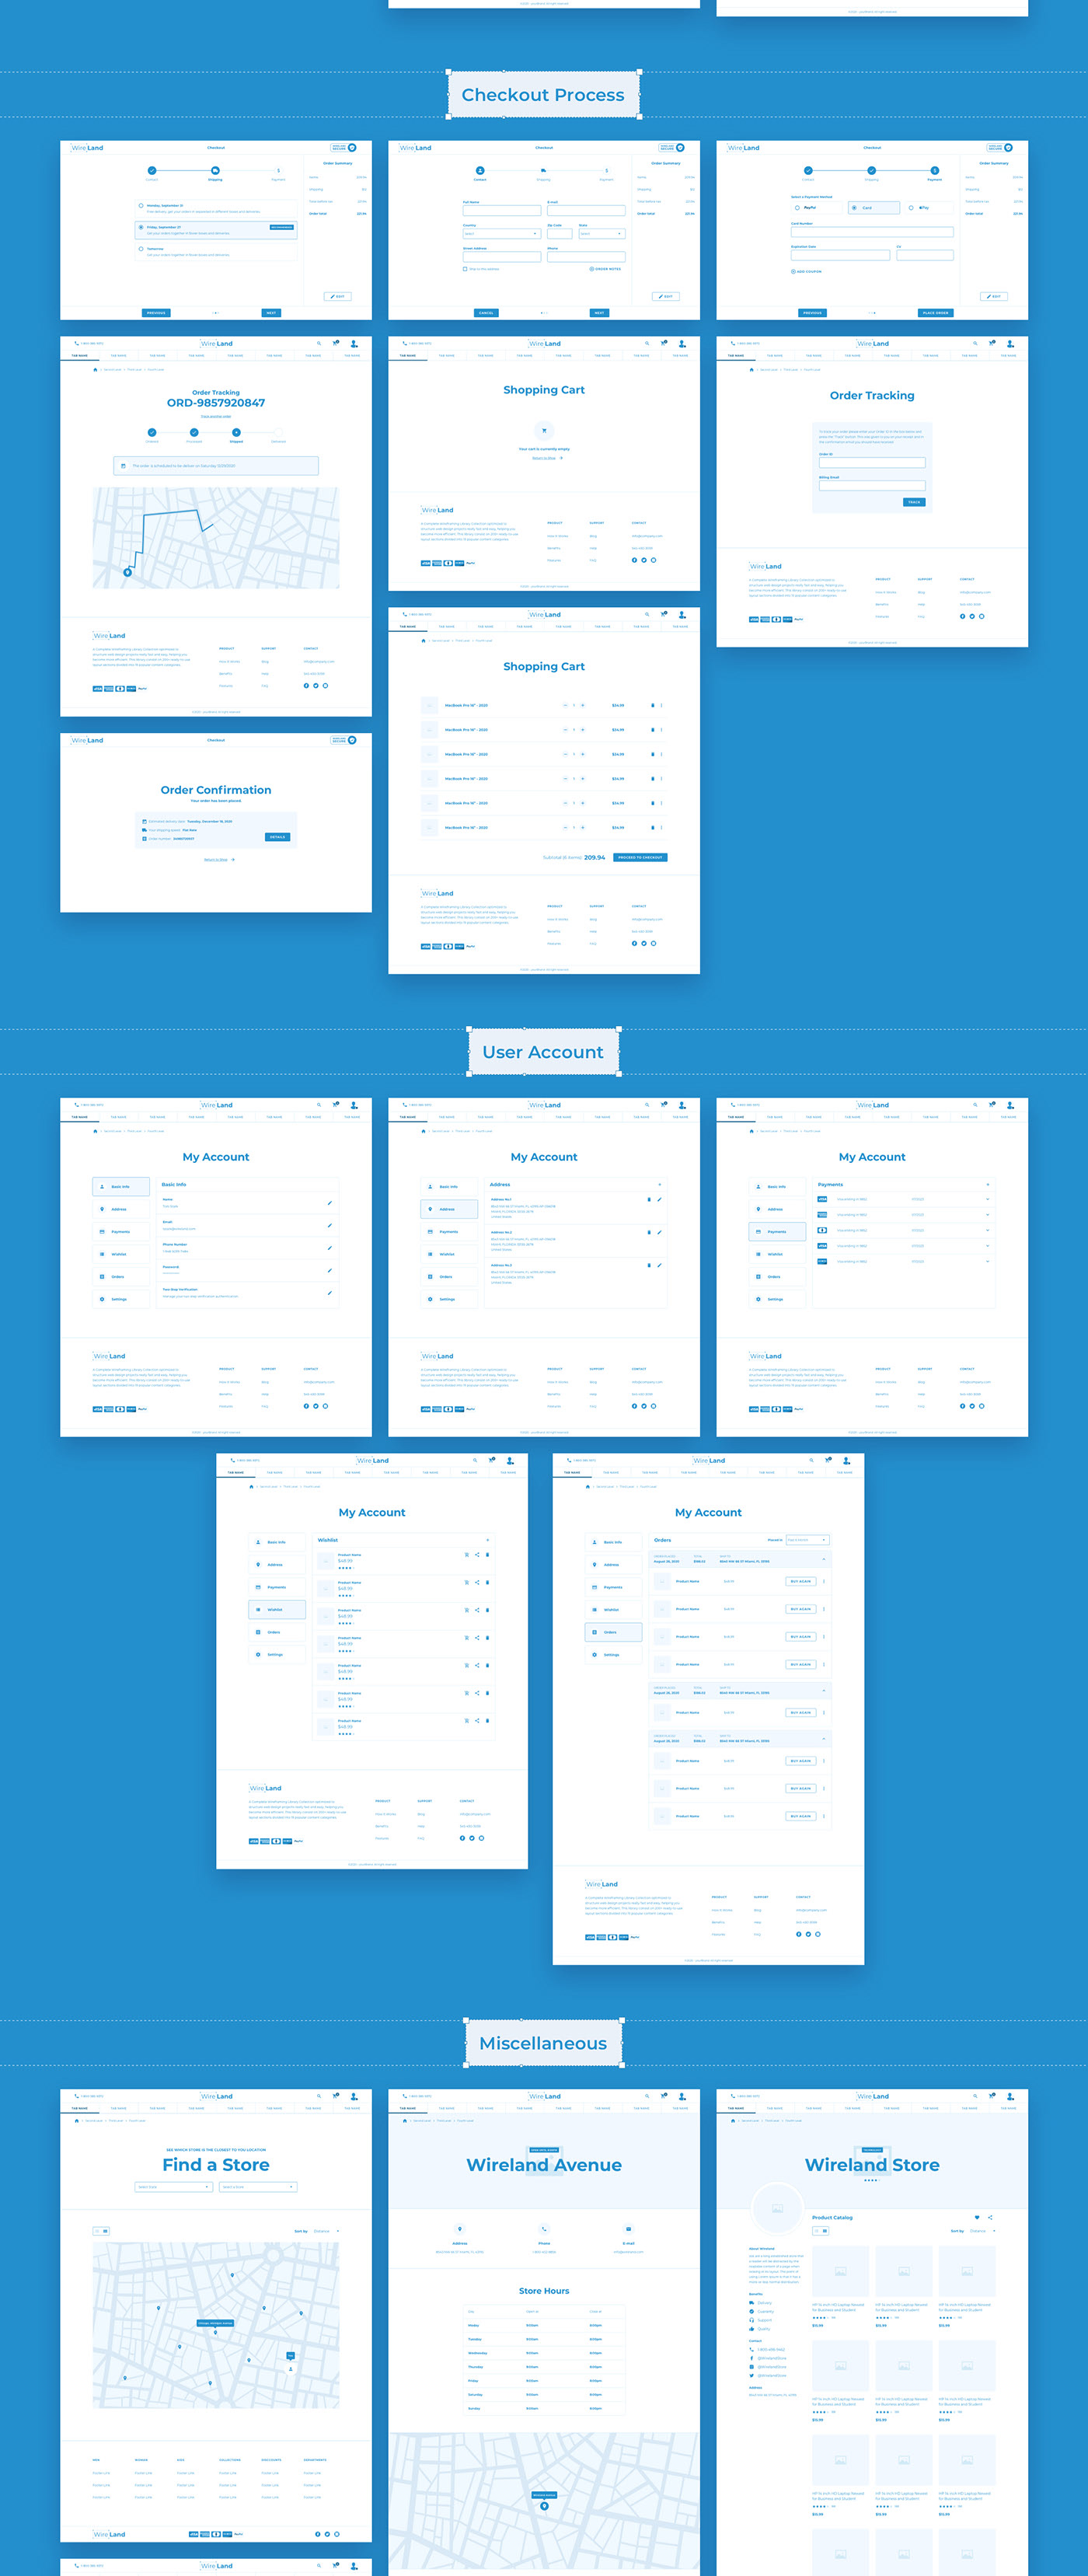 5d0db865638705.5f81f16fa1294 - Wireland for Ecommerce - Massive Wireframe Library Collection